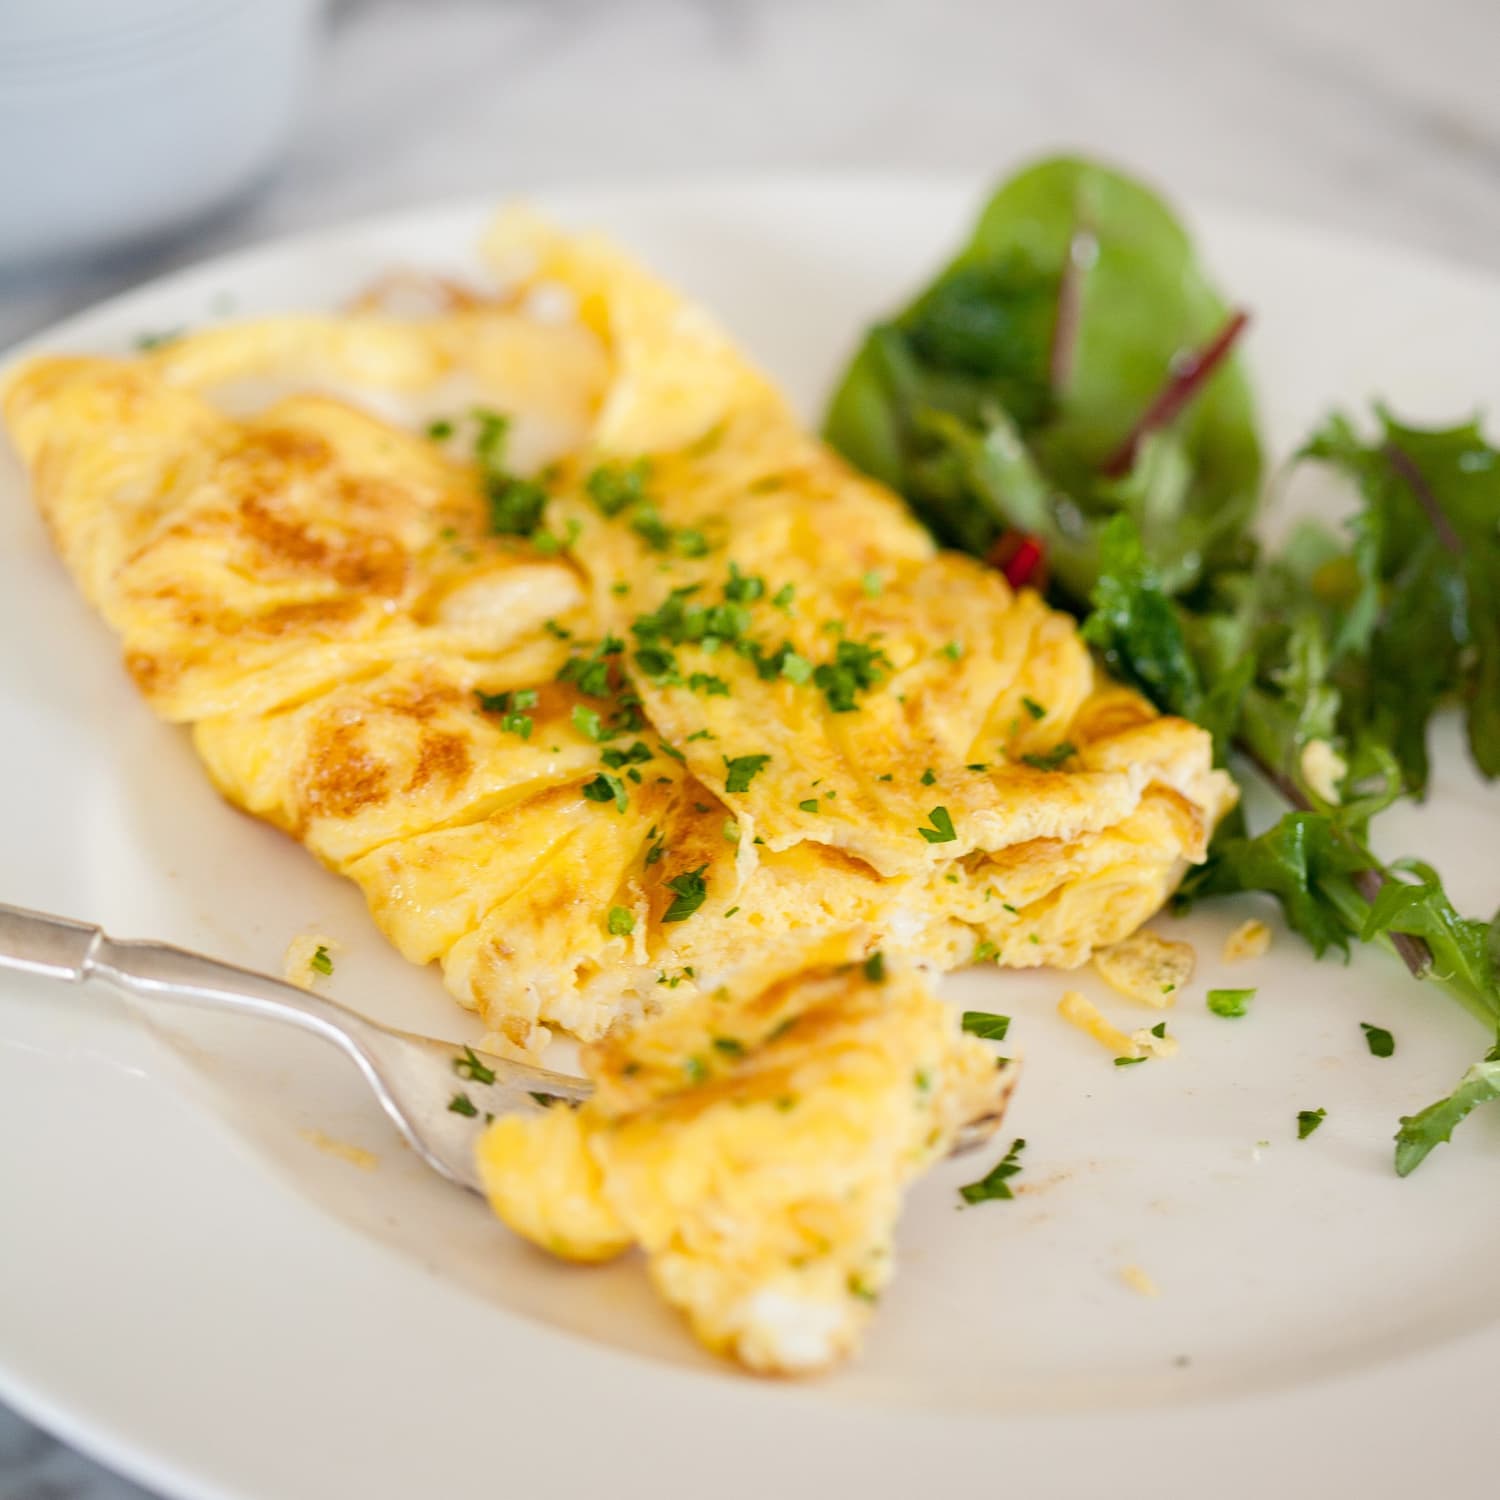 How To Make a French Omelette